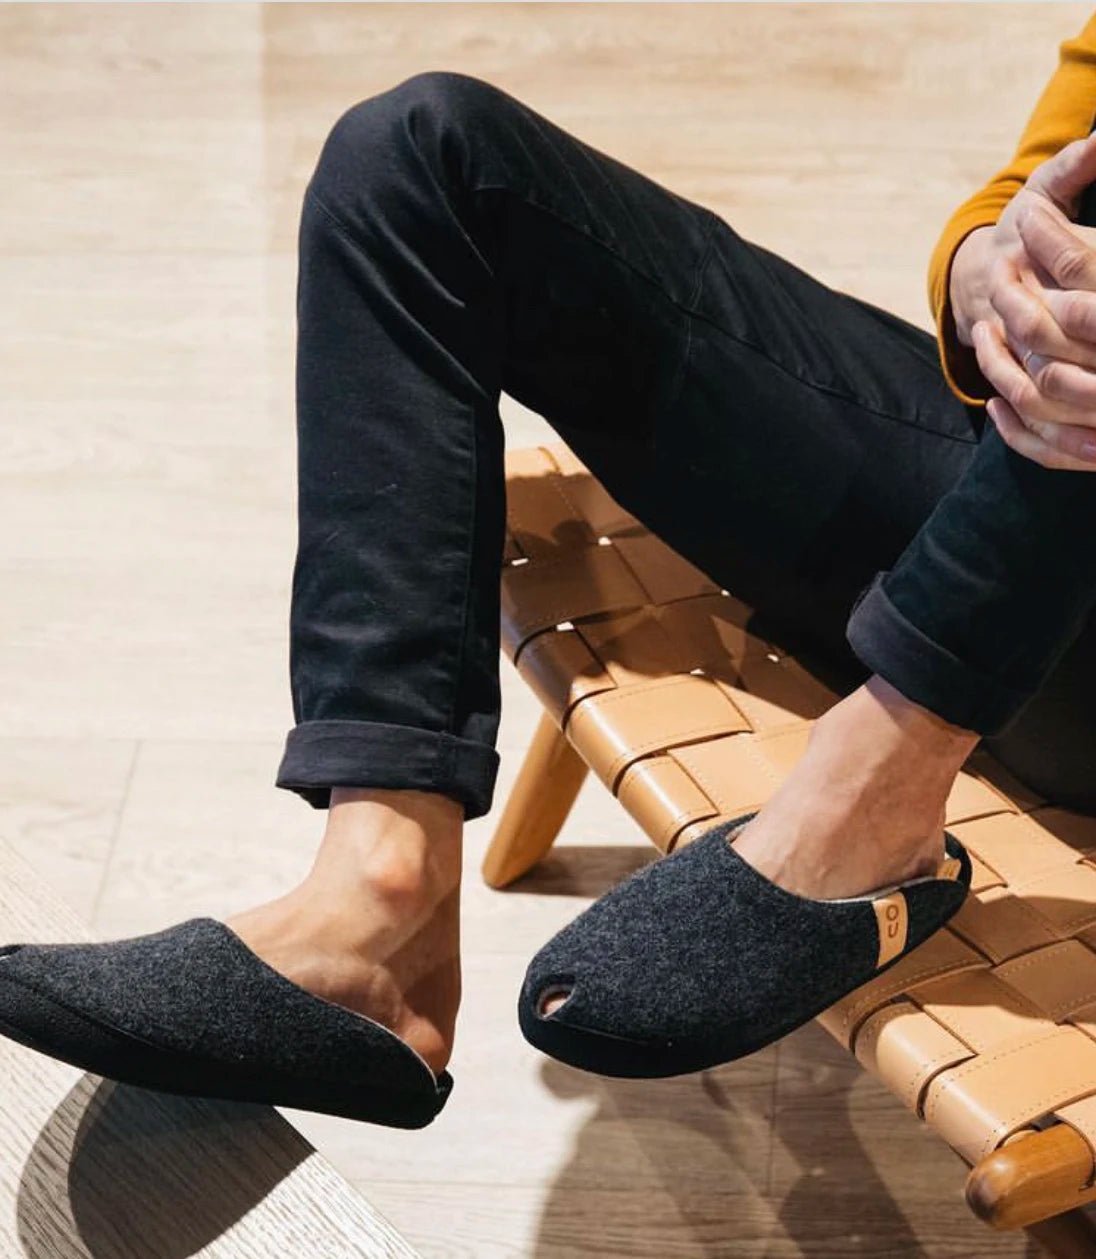 Brussels Lambswool Slippers | Charcoal - Alpineabode